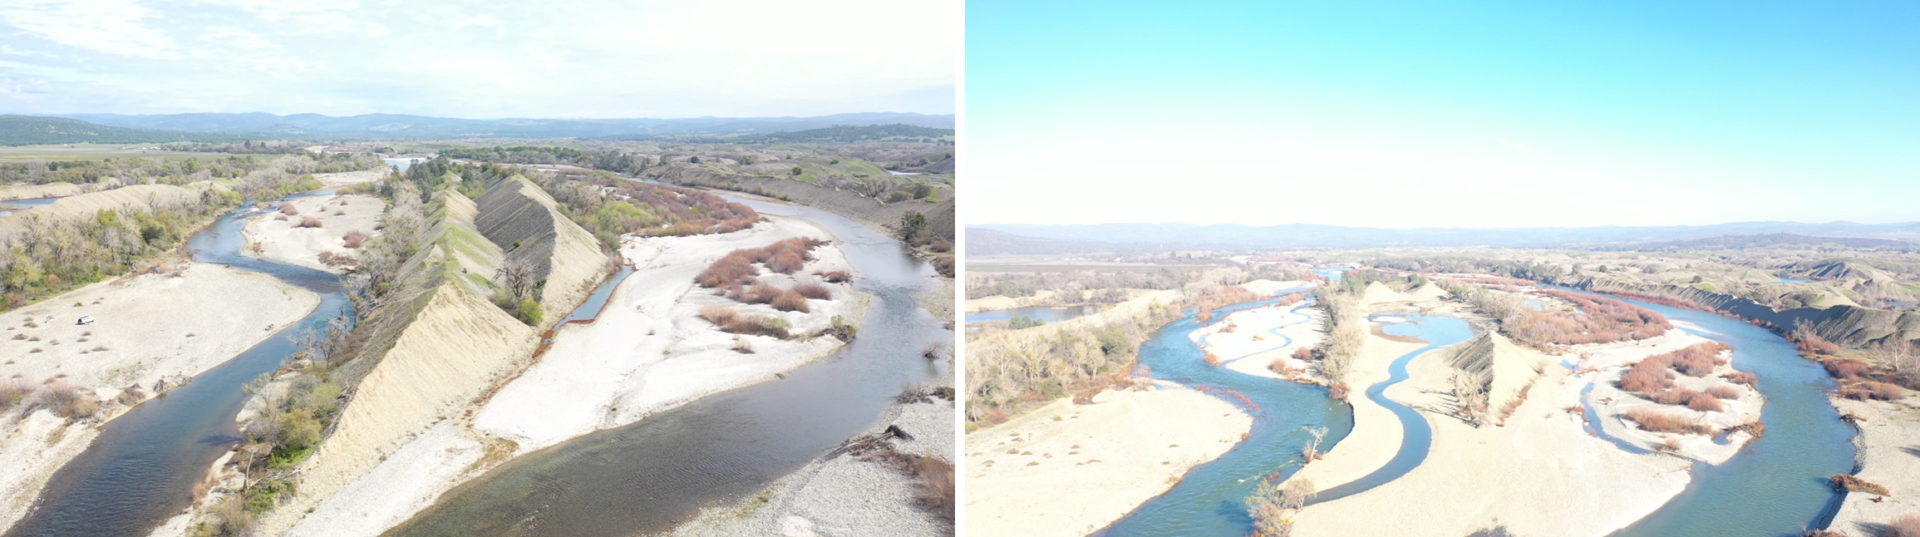 Looking upstream at Hallwood Restoration Phase 2 work area, pre-project 2021 (left) and post-project in February 2023 (right).